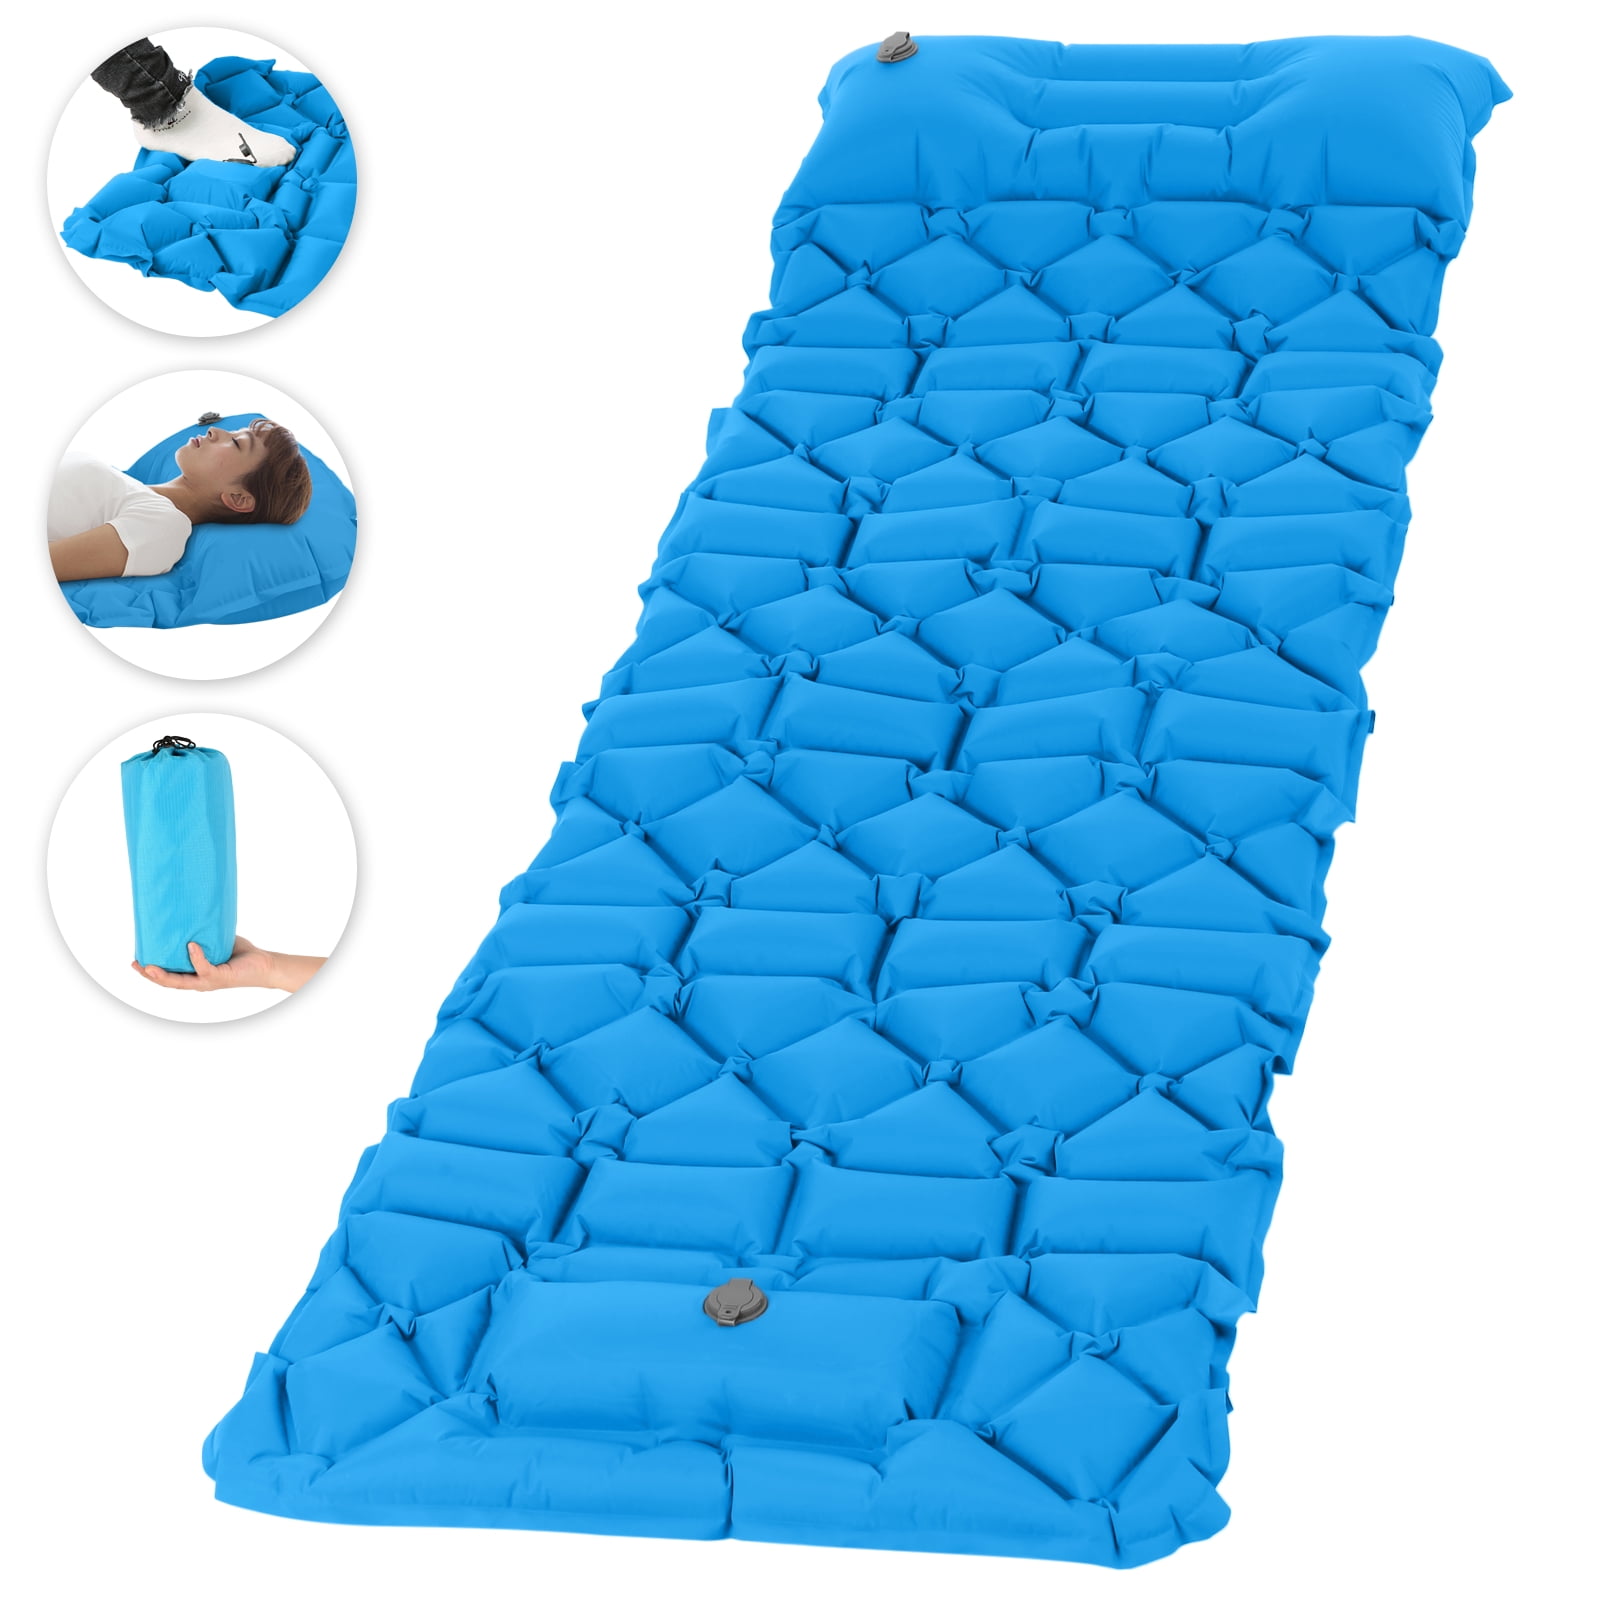 Leader Accessories Camping Sleeping Pad Ultralight Hand Press Inflated Pad,Mat Hiking and Backpacking with Storage Bag Air Mattress Built-in Pump Pillow for Camping